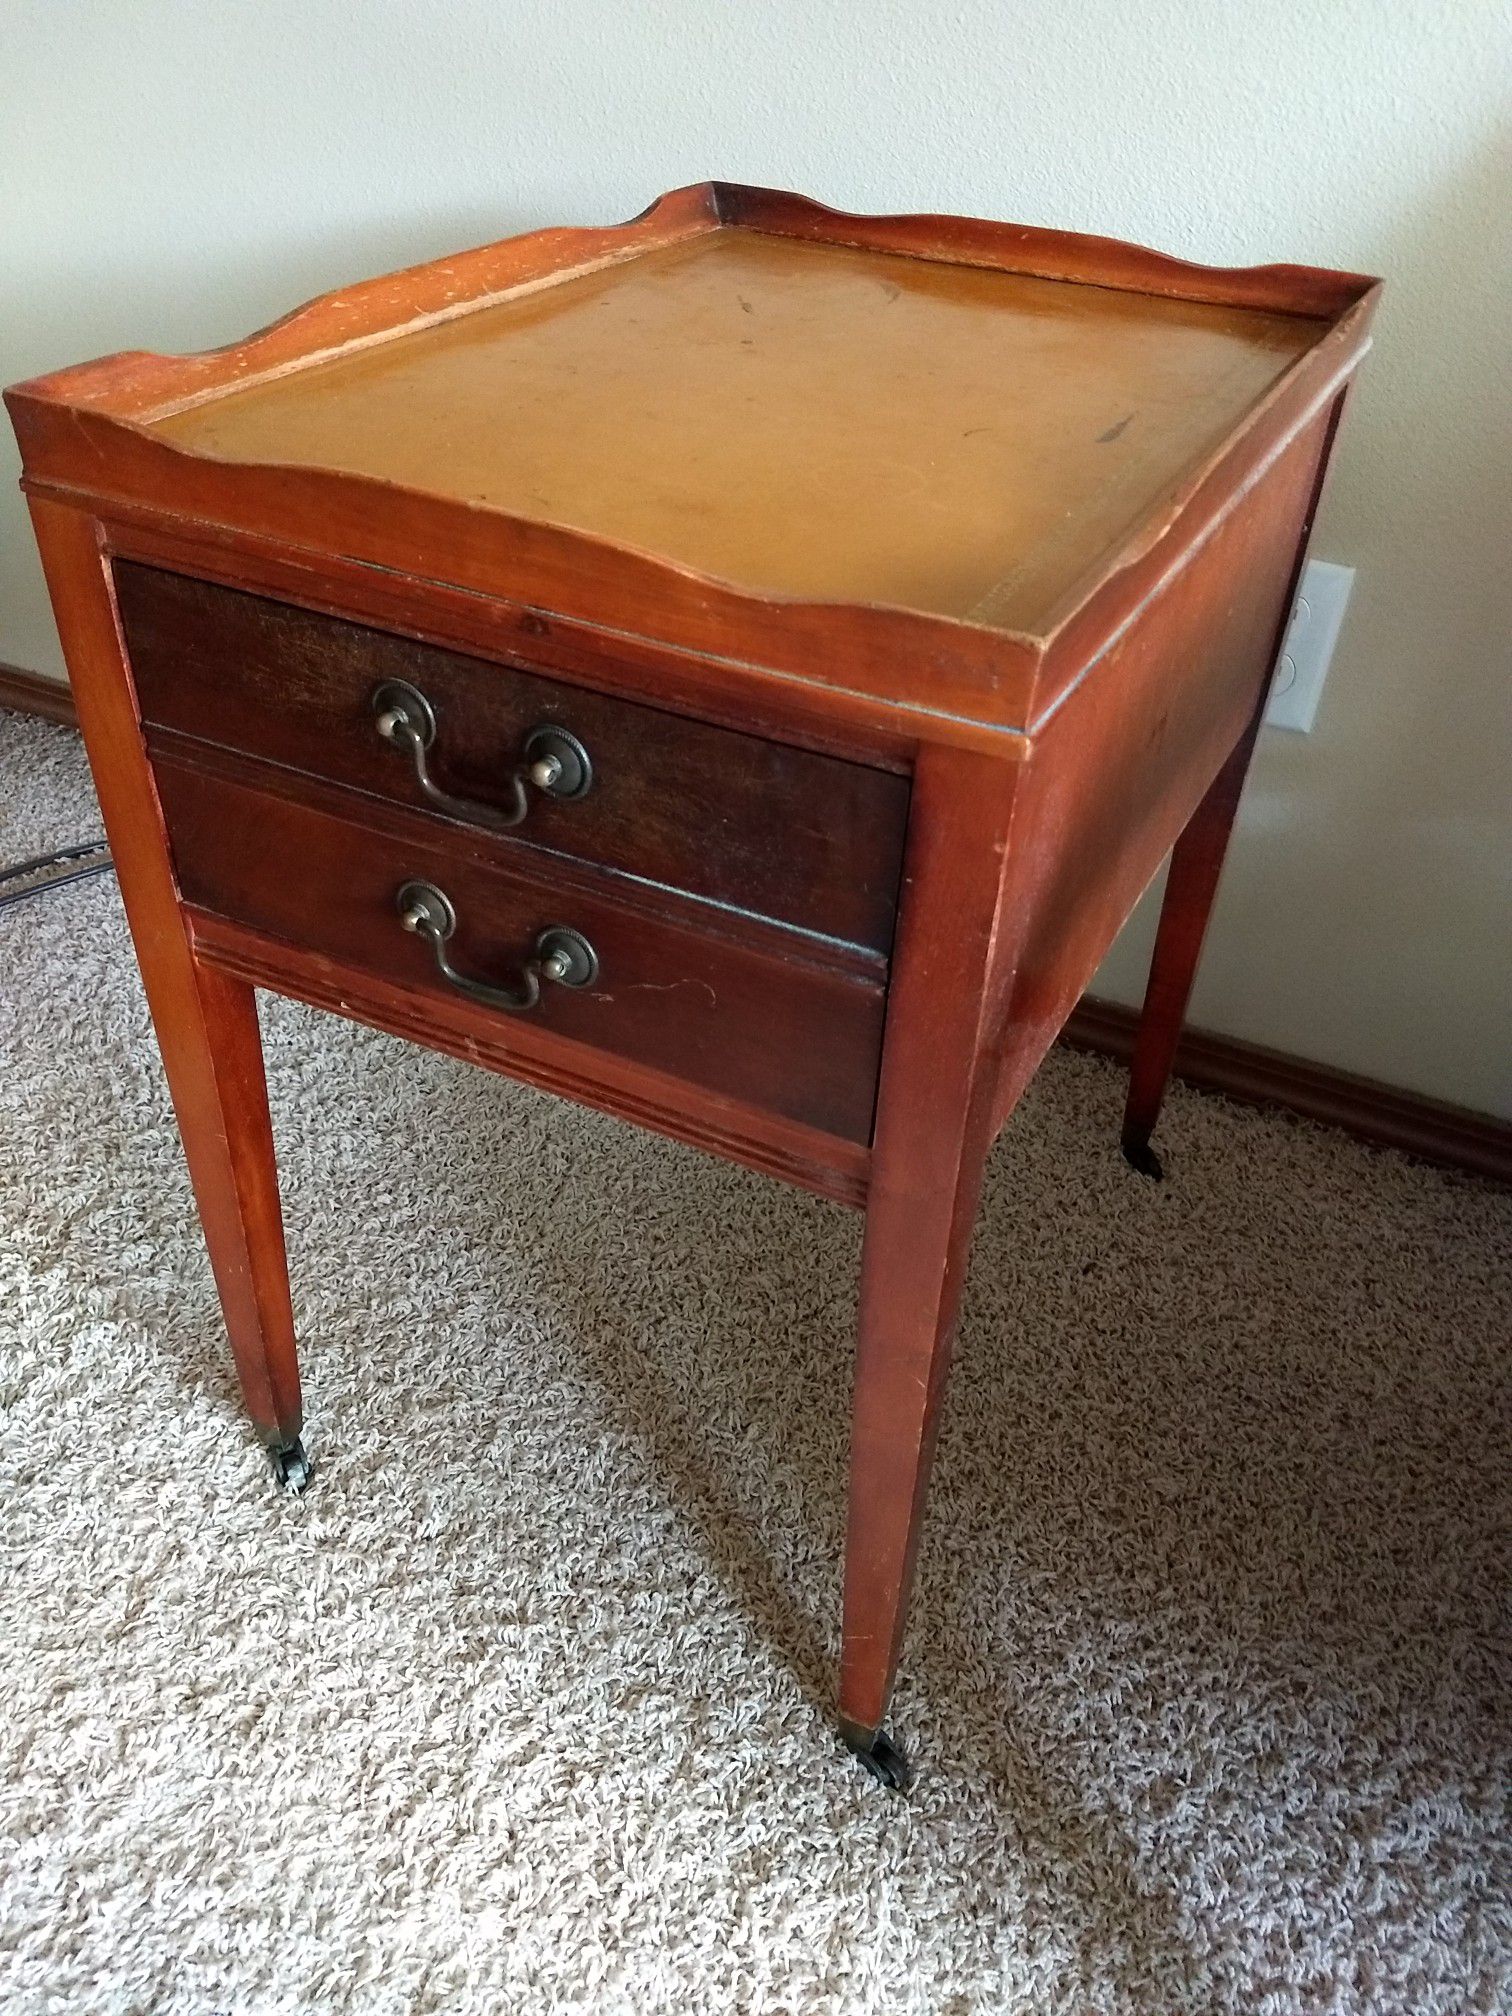 Antique Mail Table, embossed leather